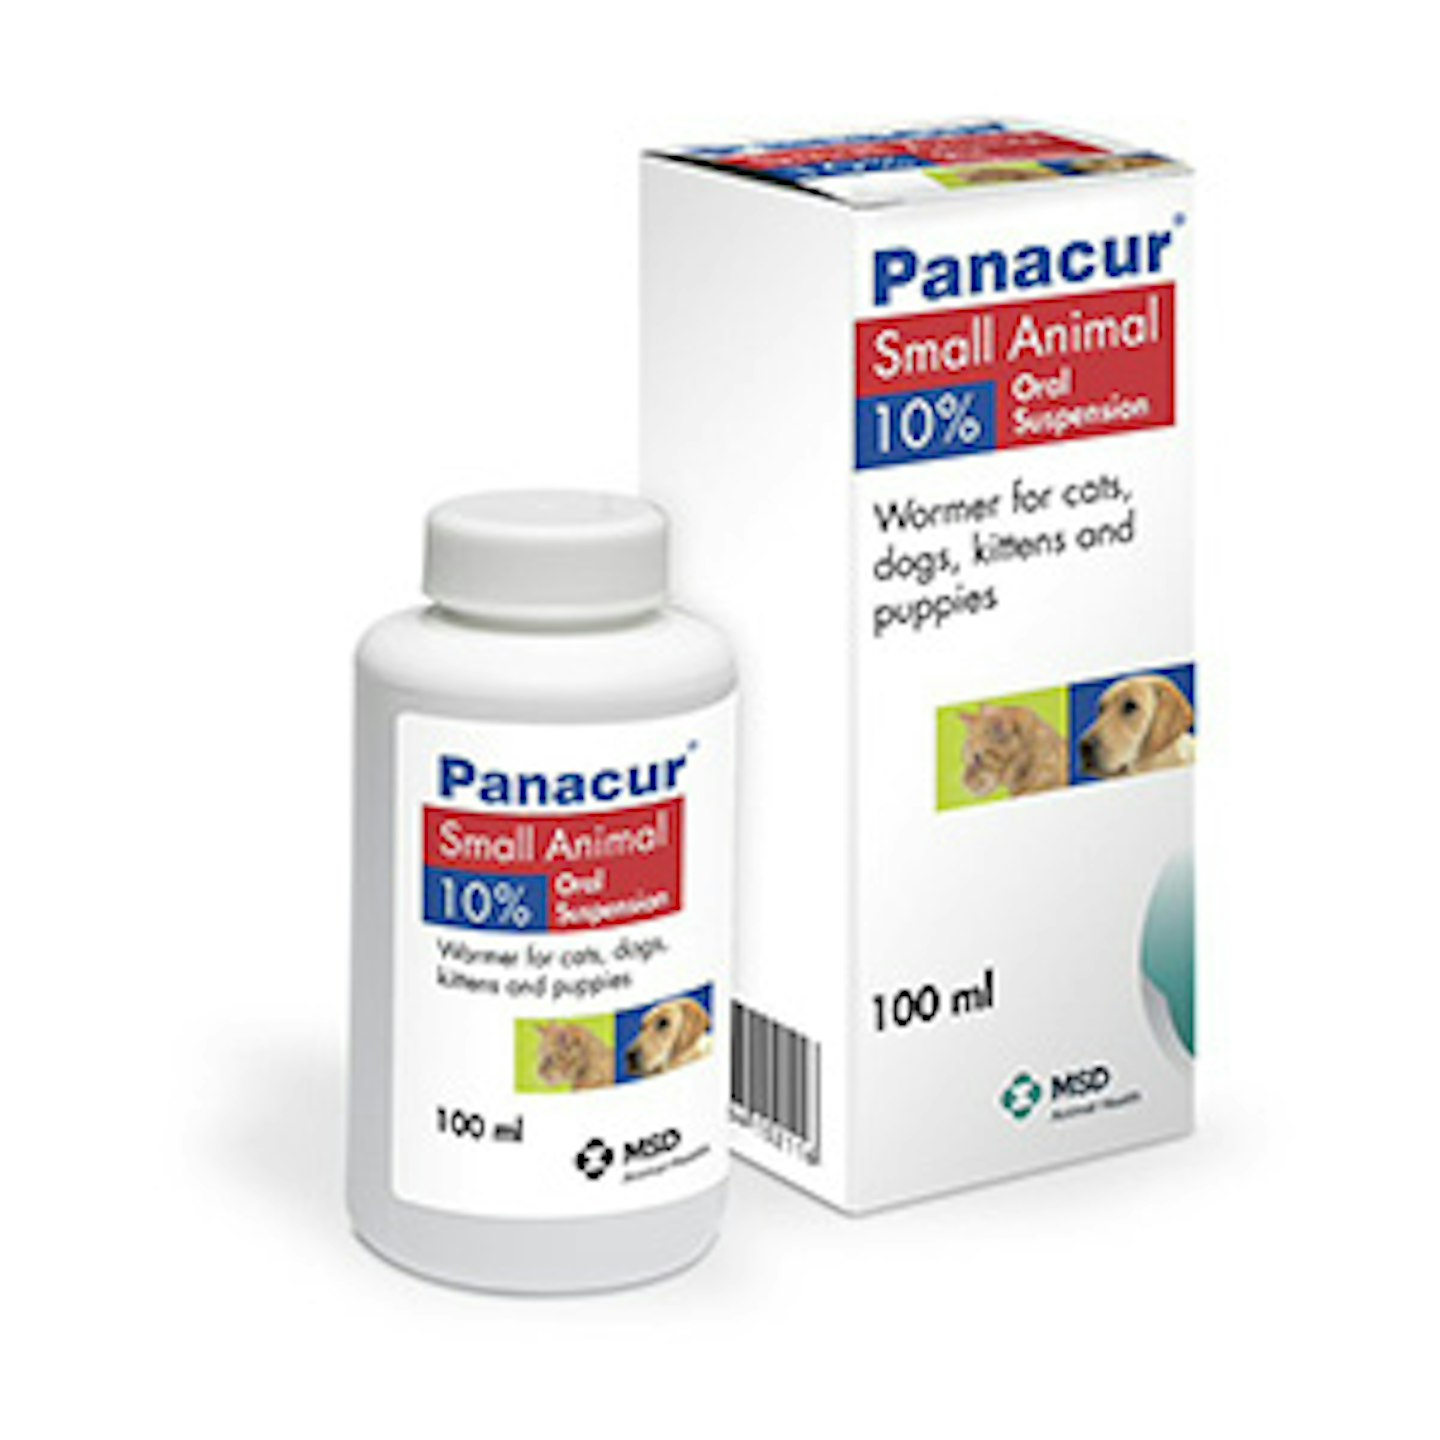 Panacur Worming Syrup 10% for Cats